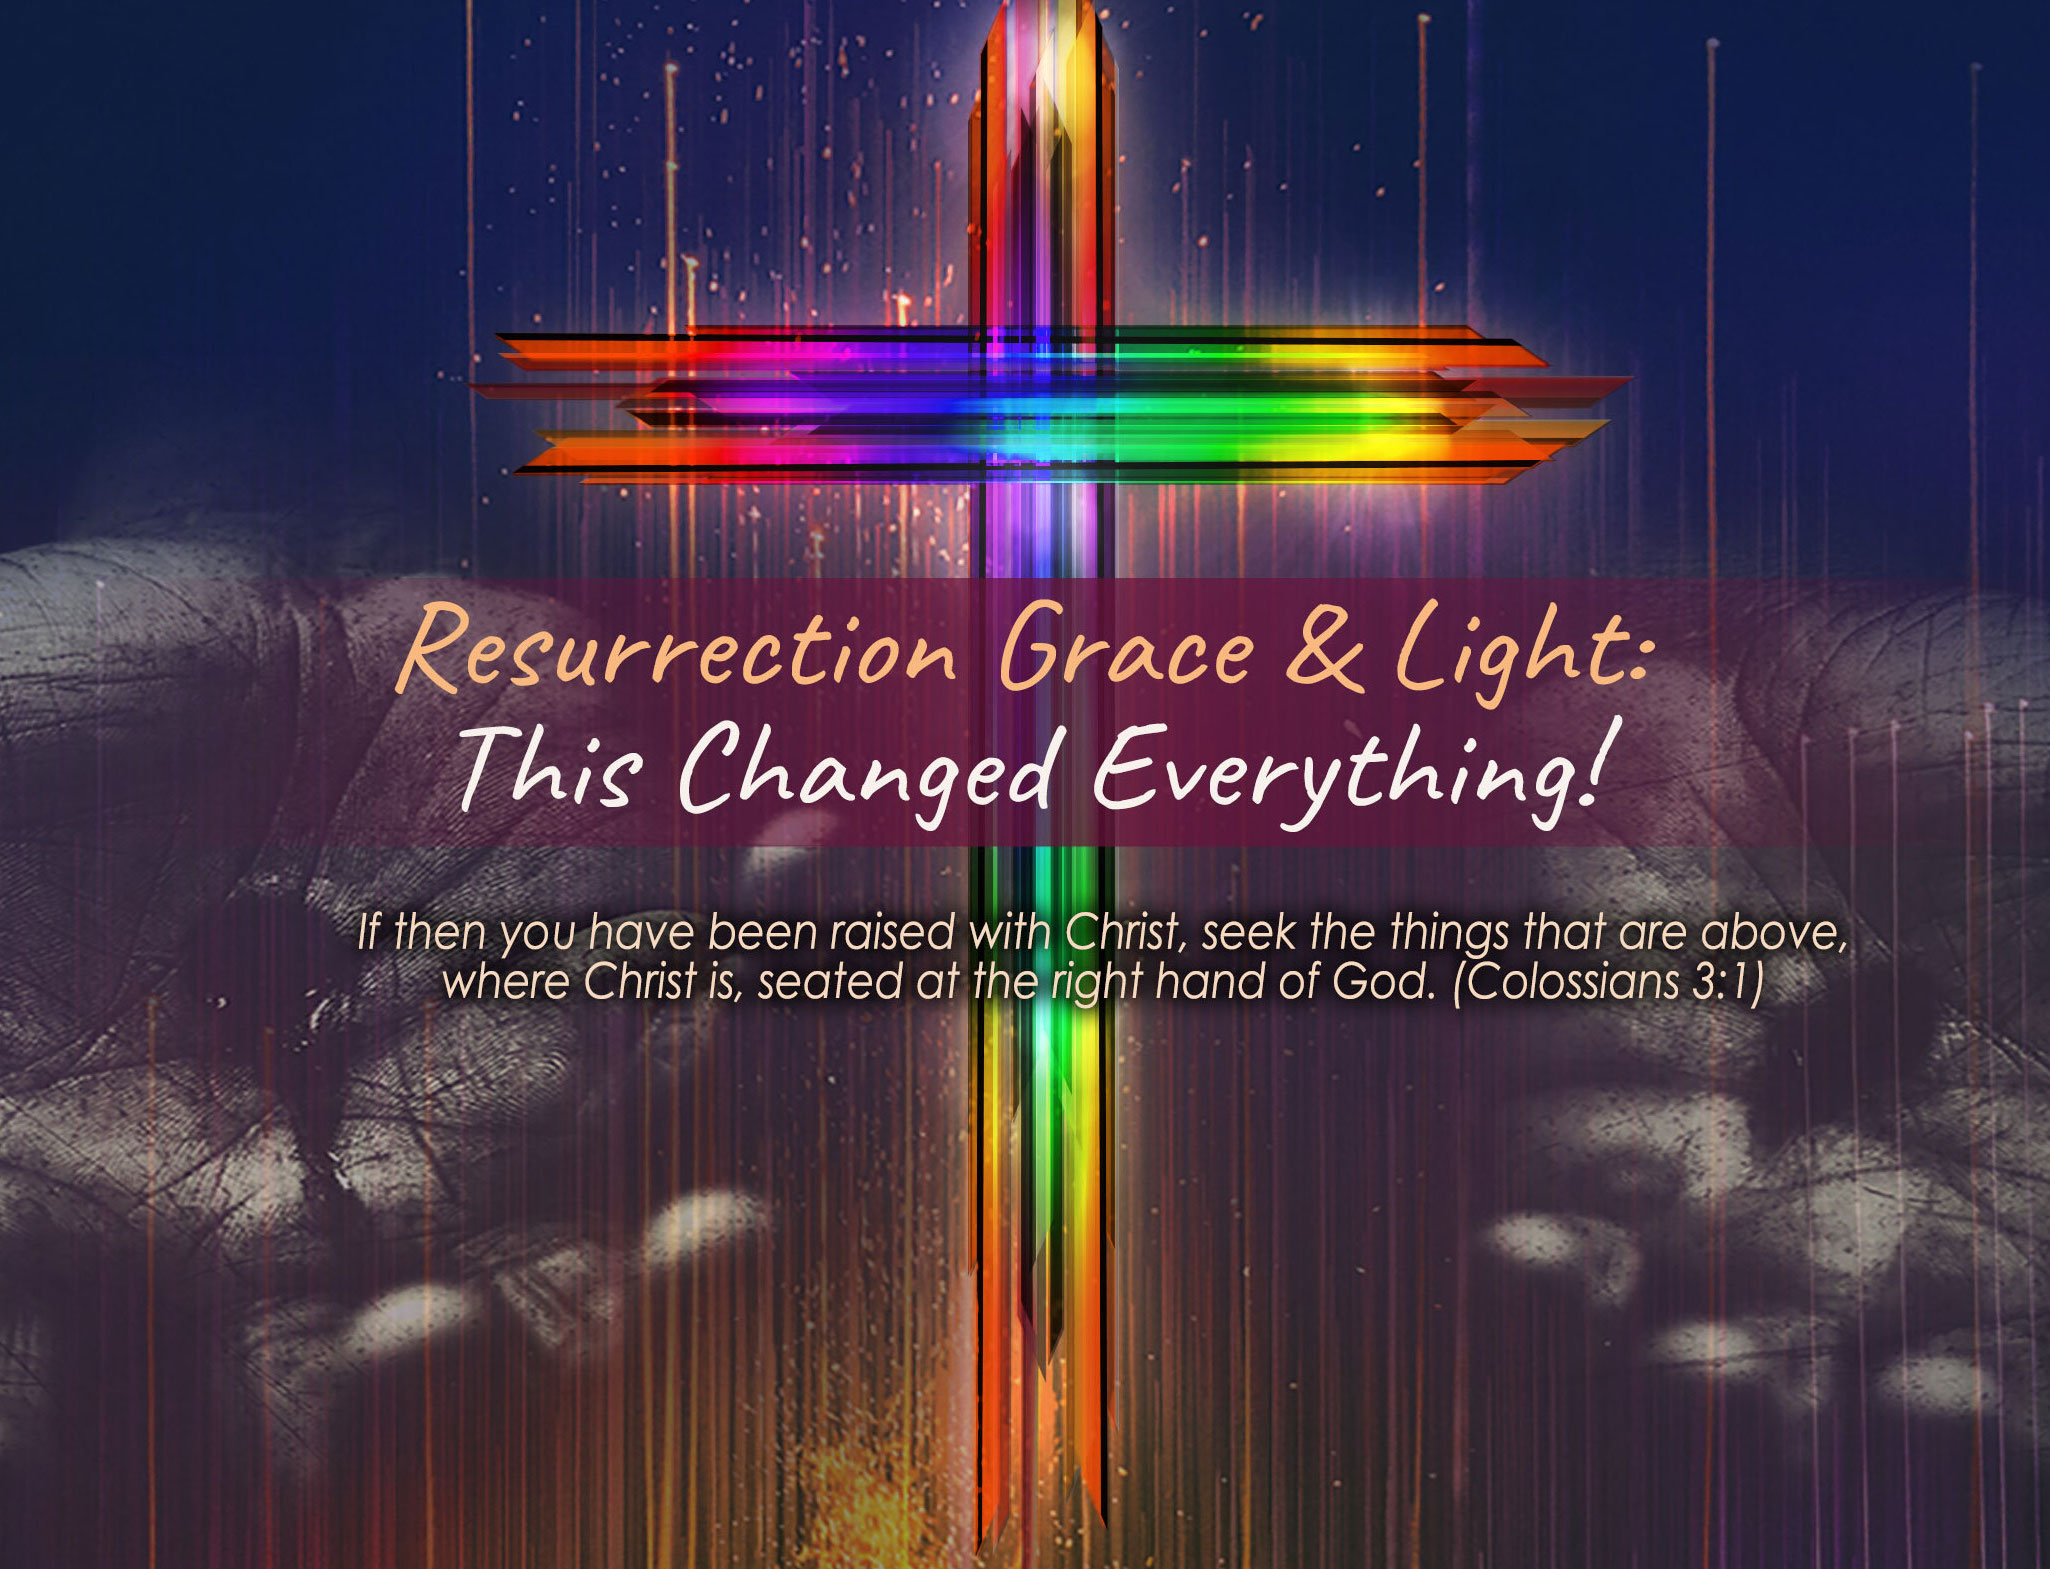 Jesus Resurrection Grace & Light: This Changed Everything!